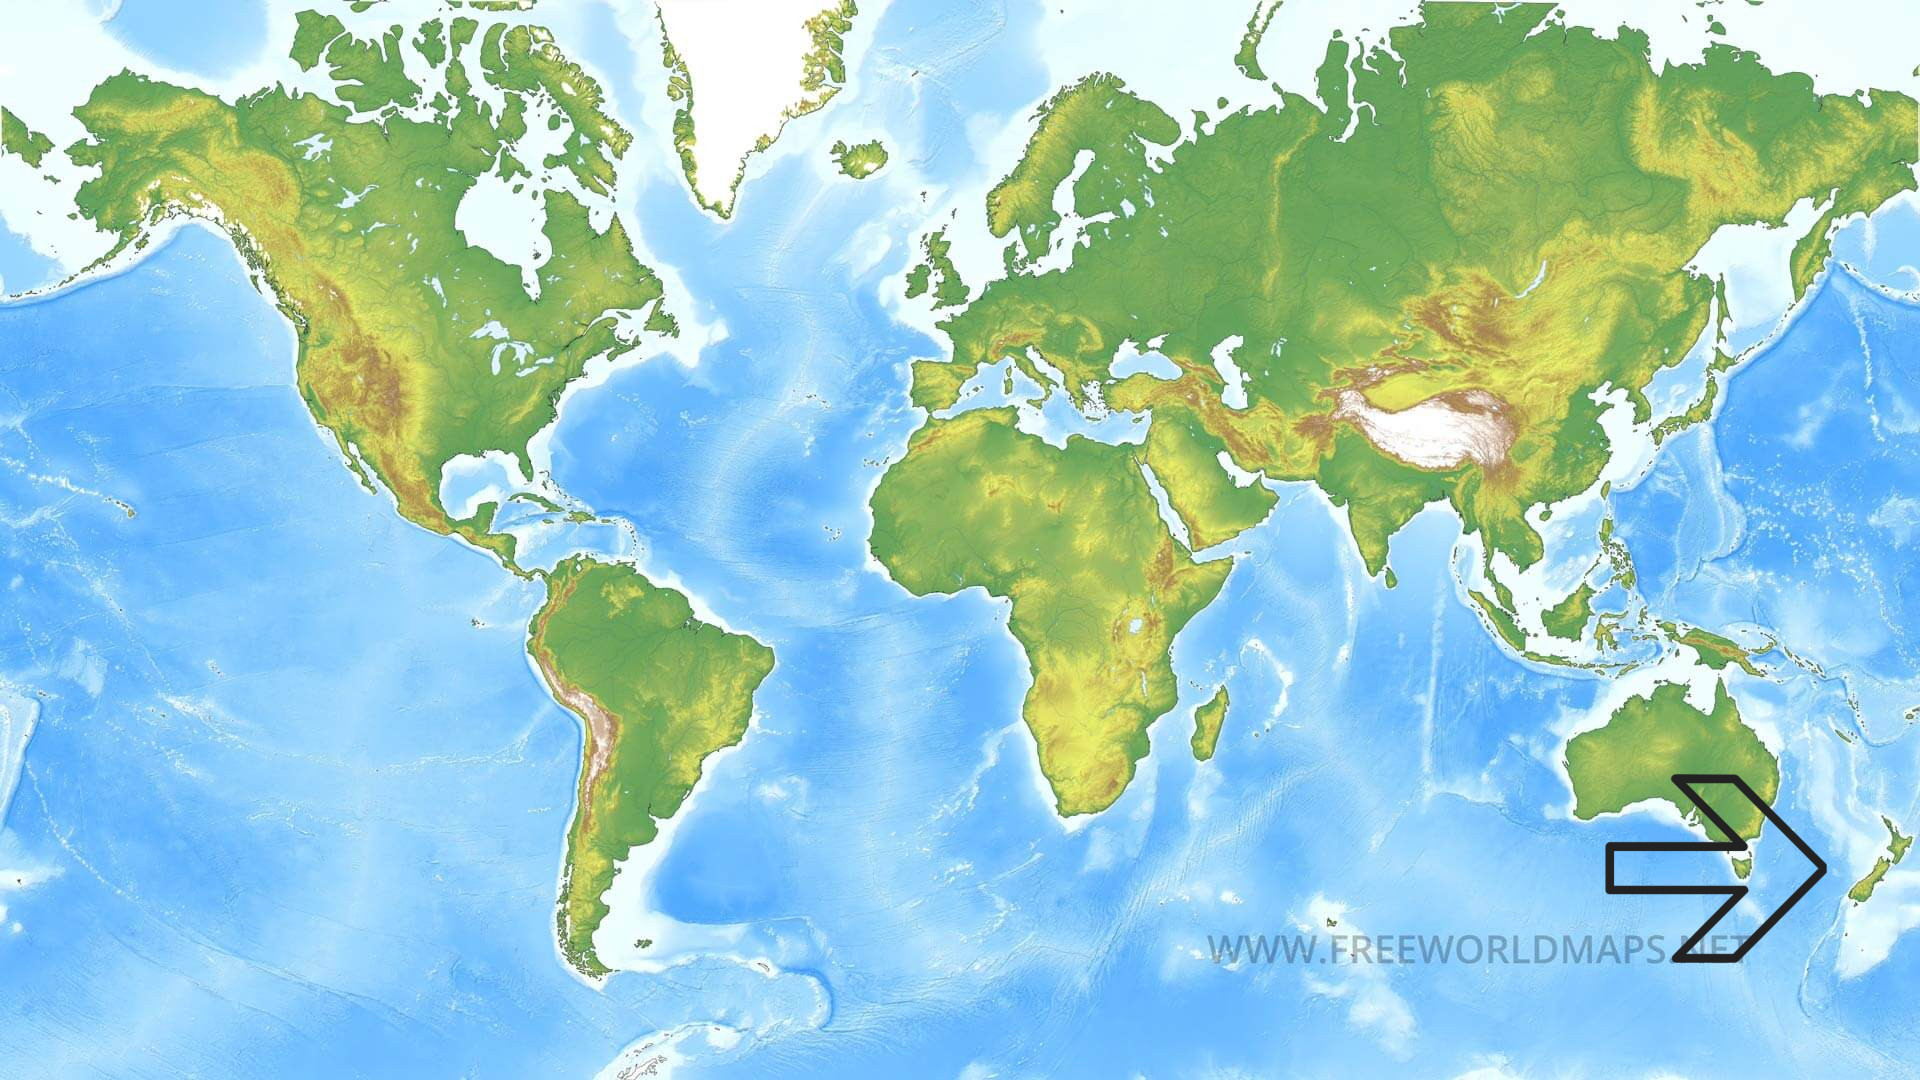 World map showing New Zealand location